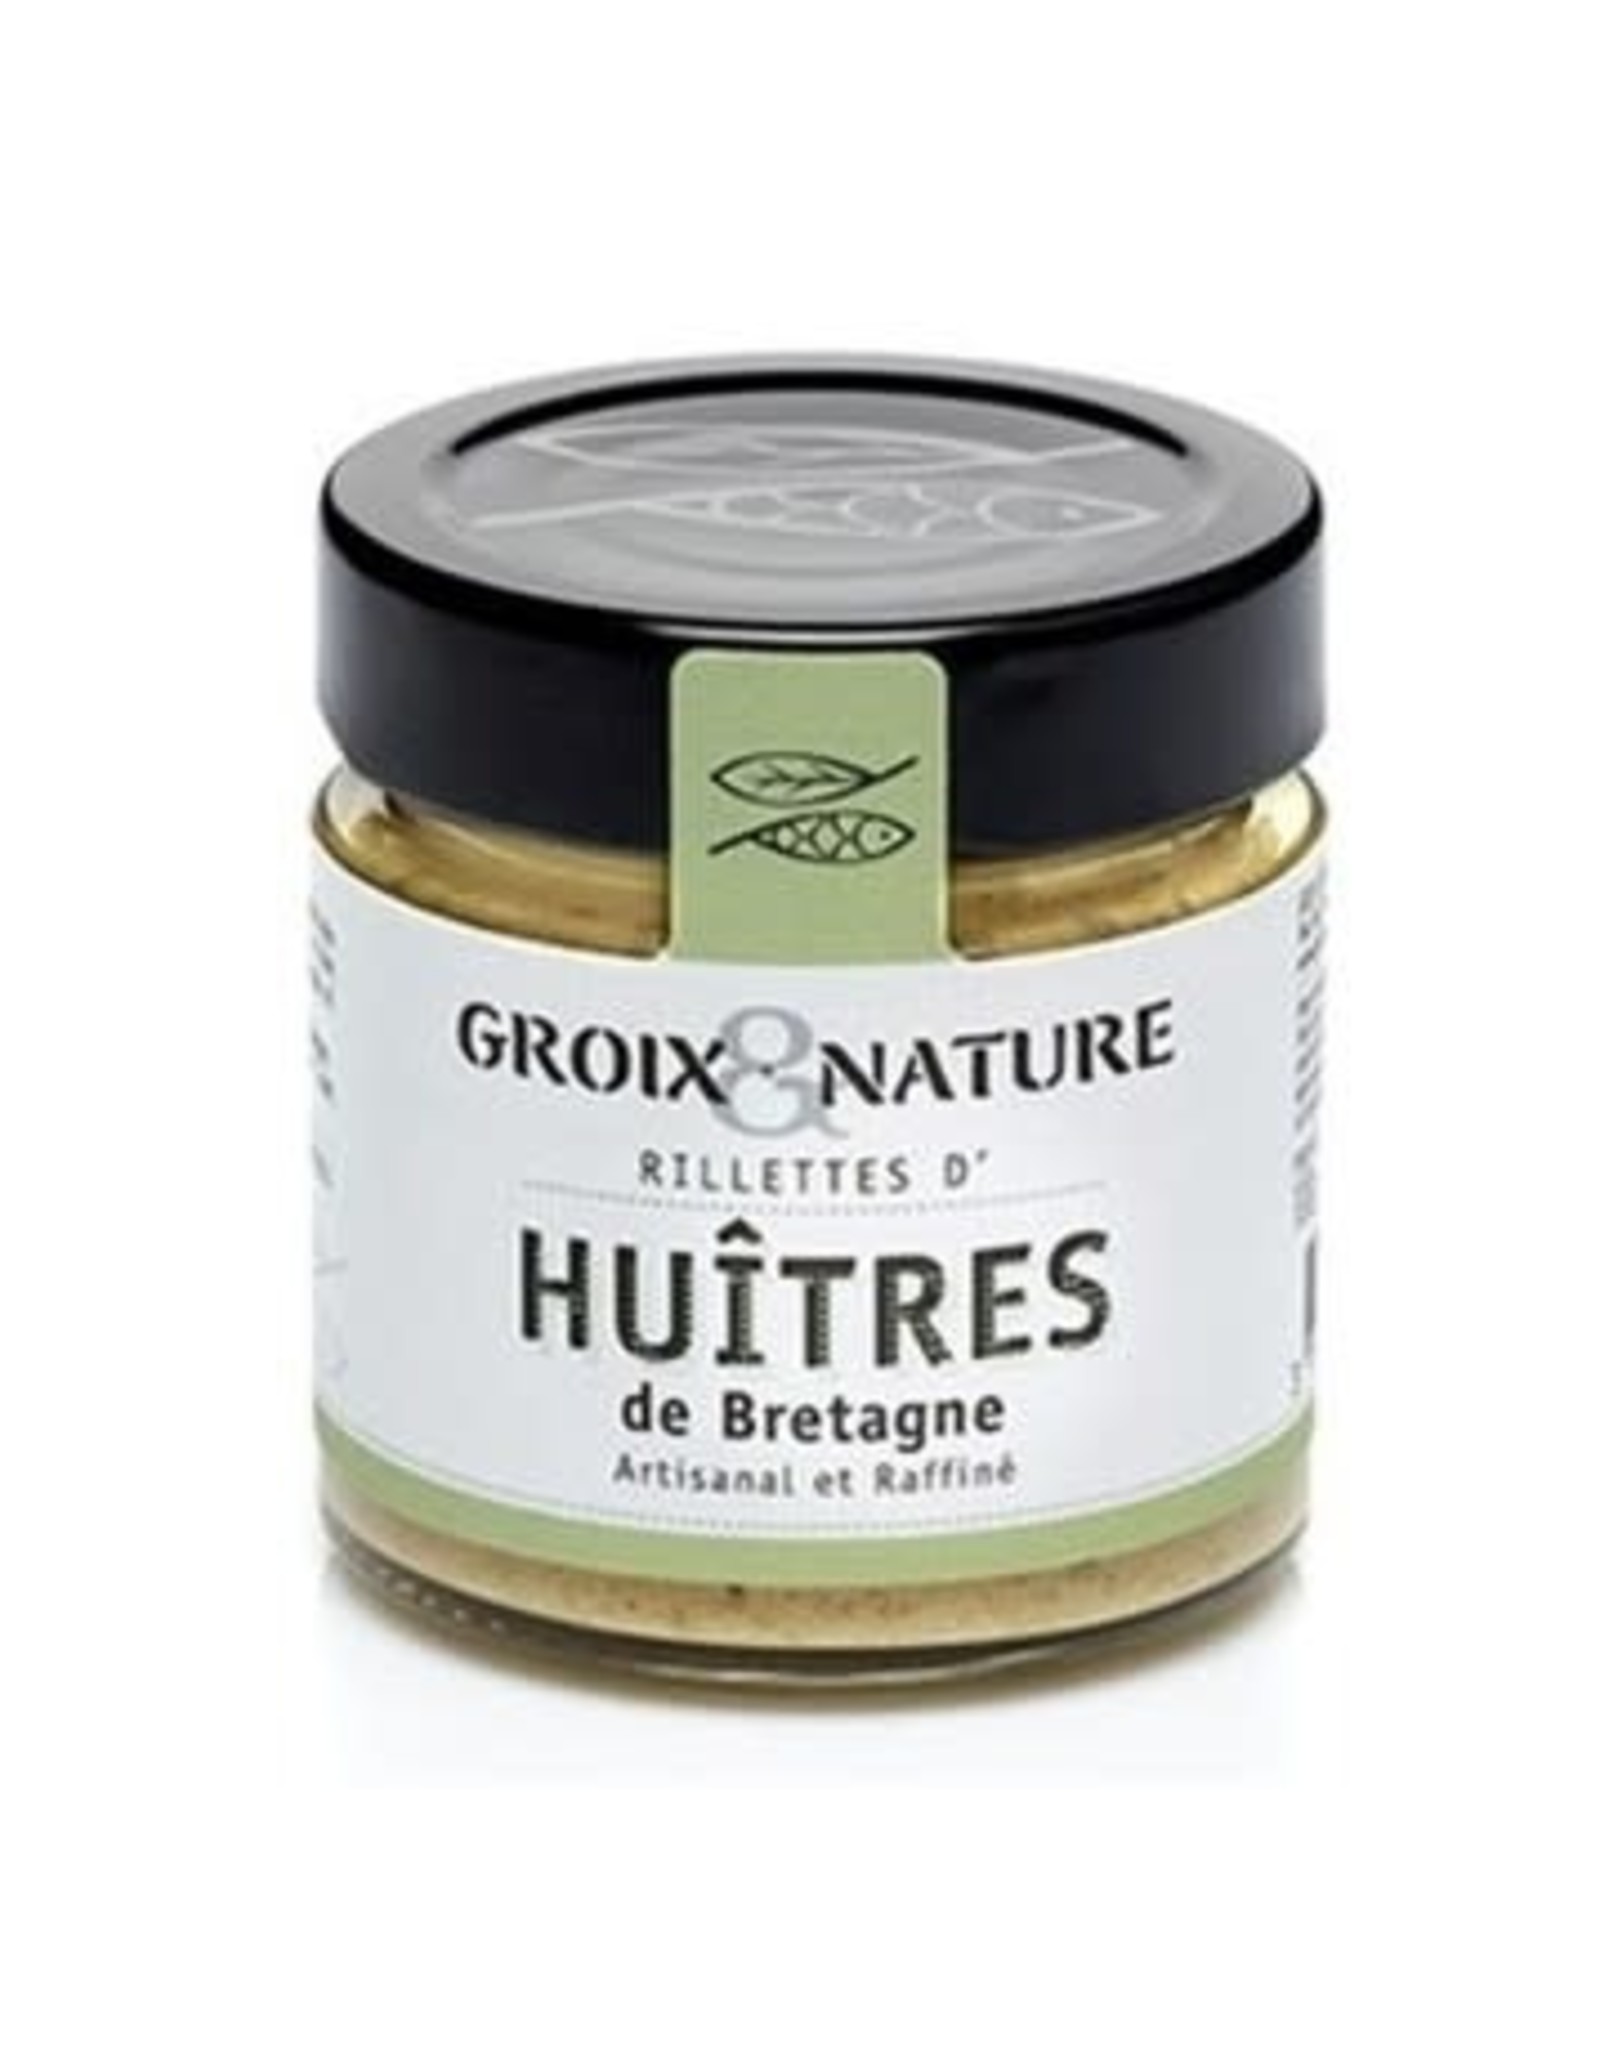 Groix Nature Brittany Oyster Rillettes